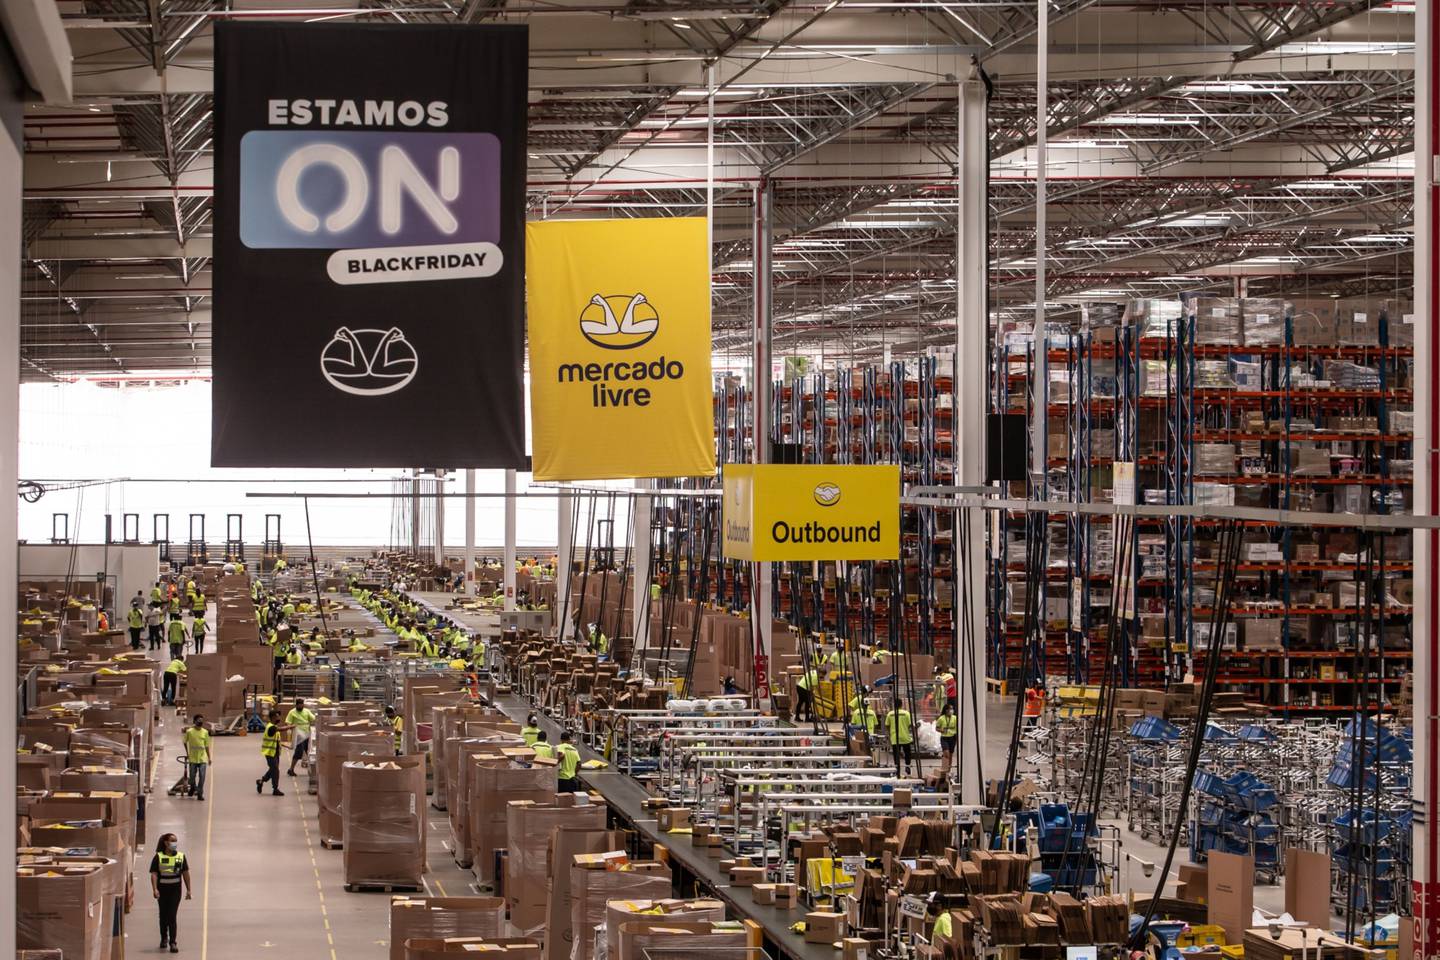 Workers walk through a MercadoLibre Inc. distribution and fulfillment center in Cajamar-SP, Brazil, on Friday, Nov. 27, 2020.